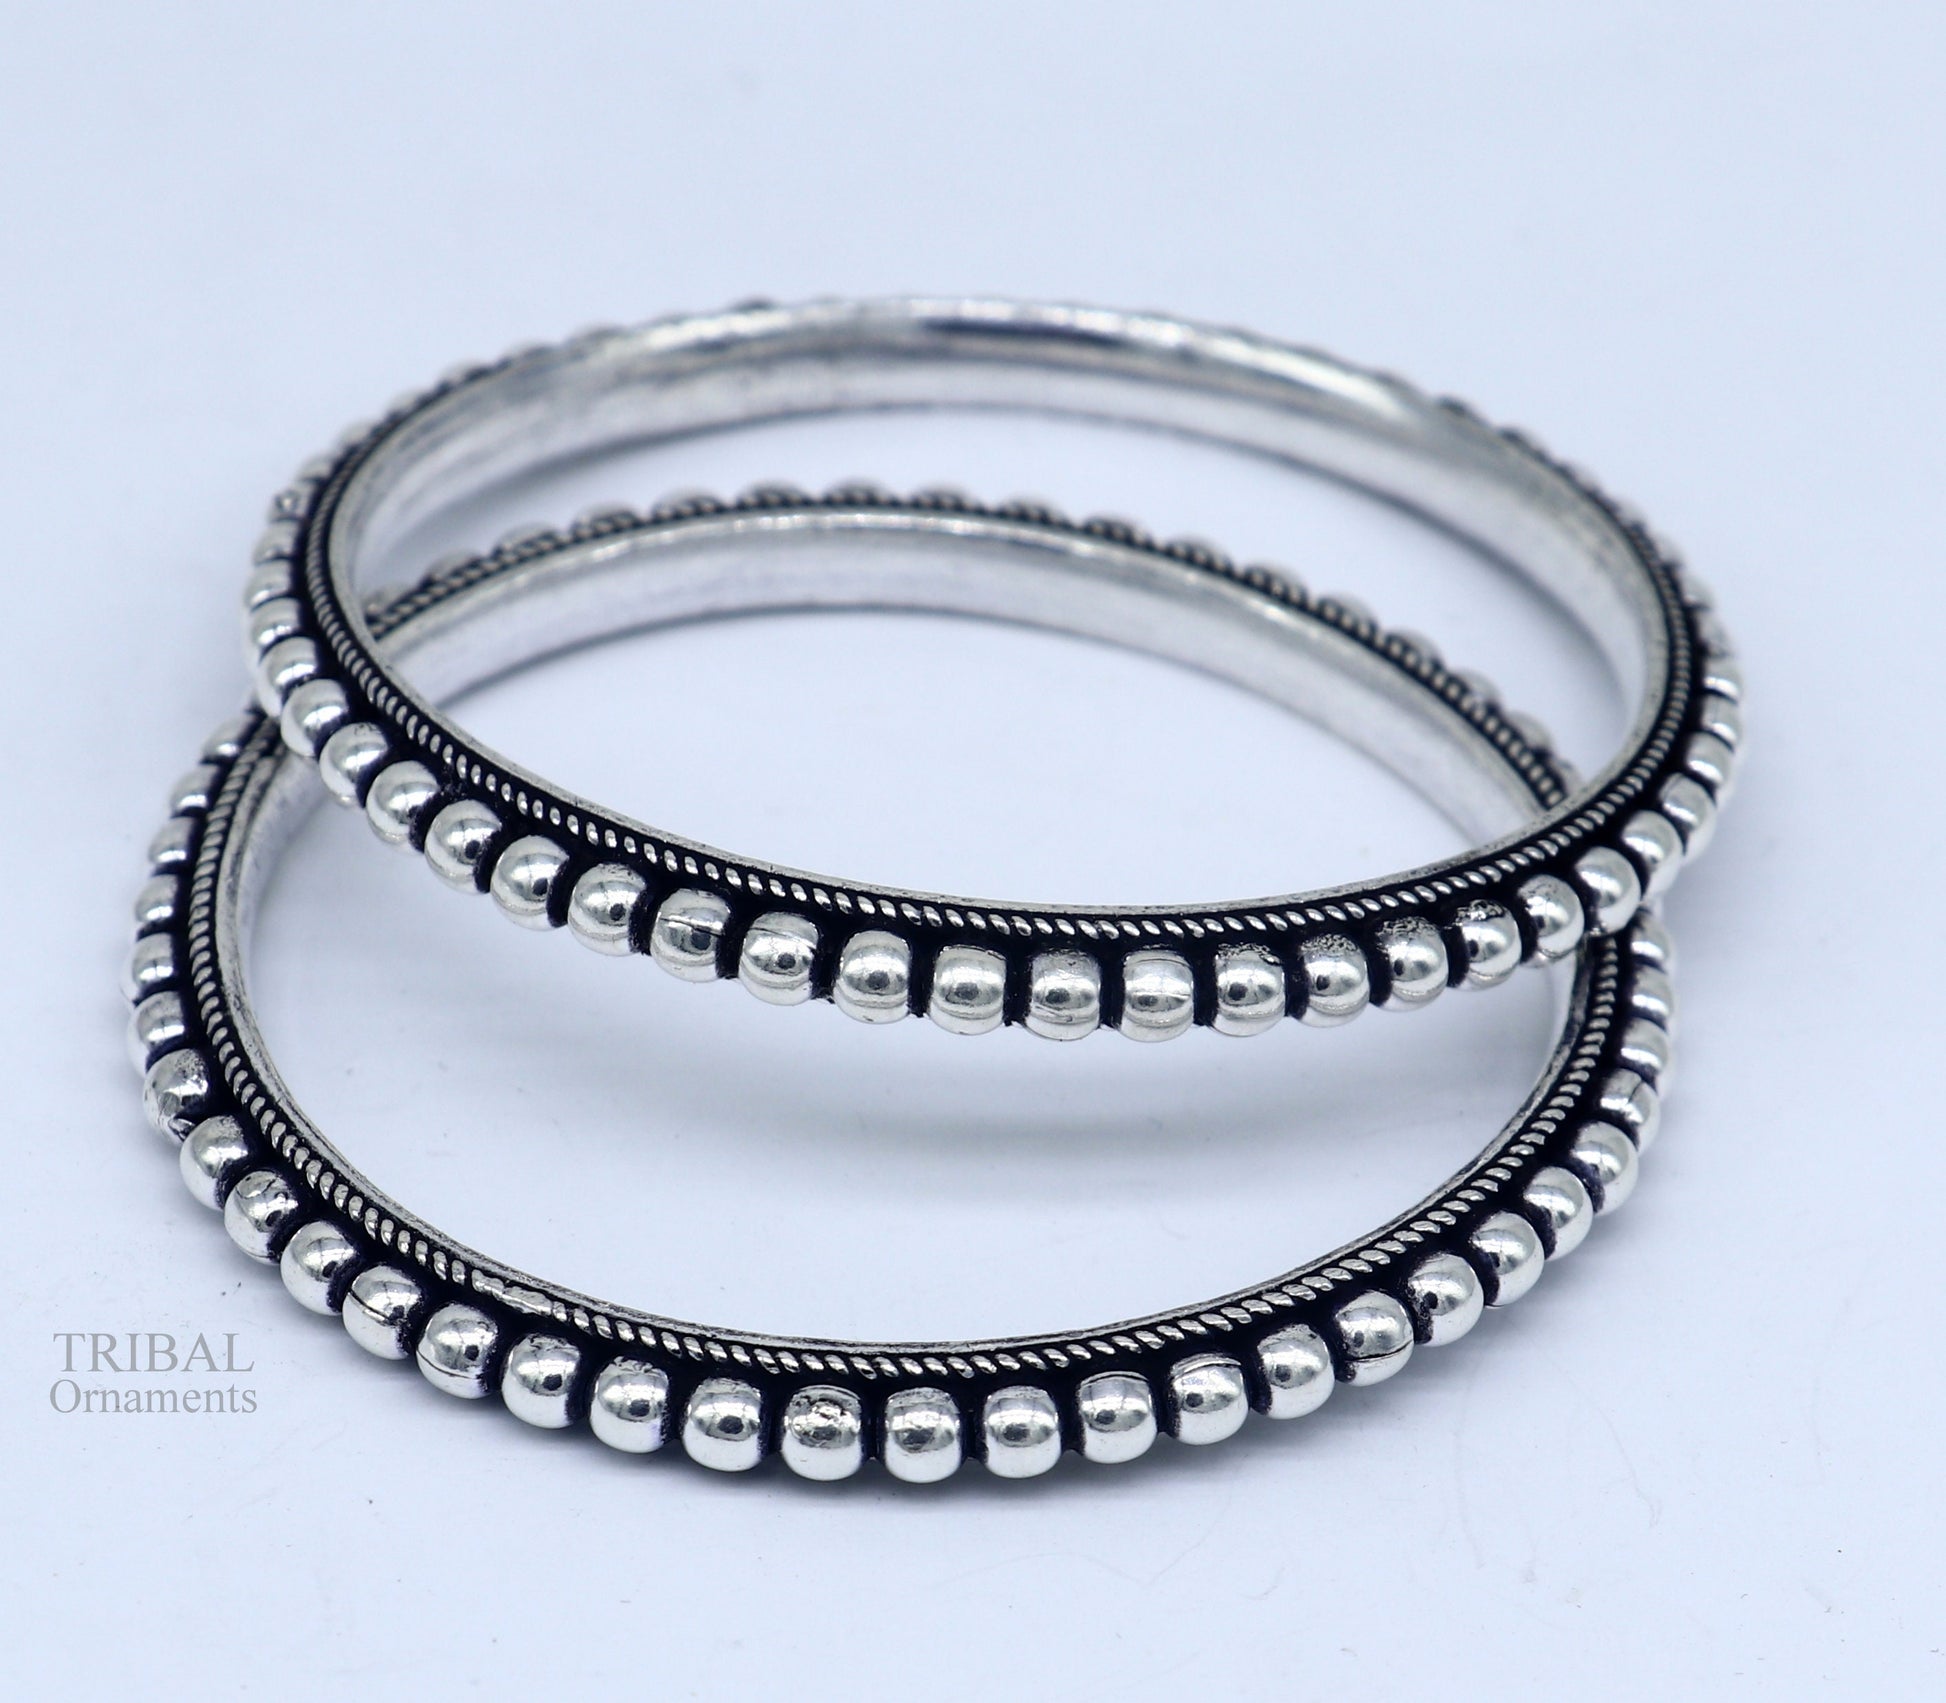 925 sterling silver amazing silver beaded bangle bracelet, excellent custom made oxidized personalized bangle jewelry for belly dance nba273 - TRIBAL ORNAMENTS